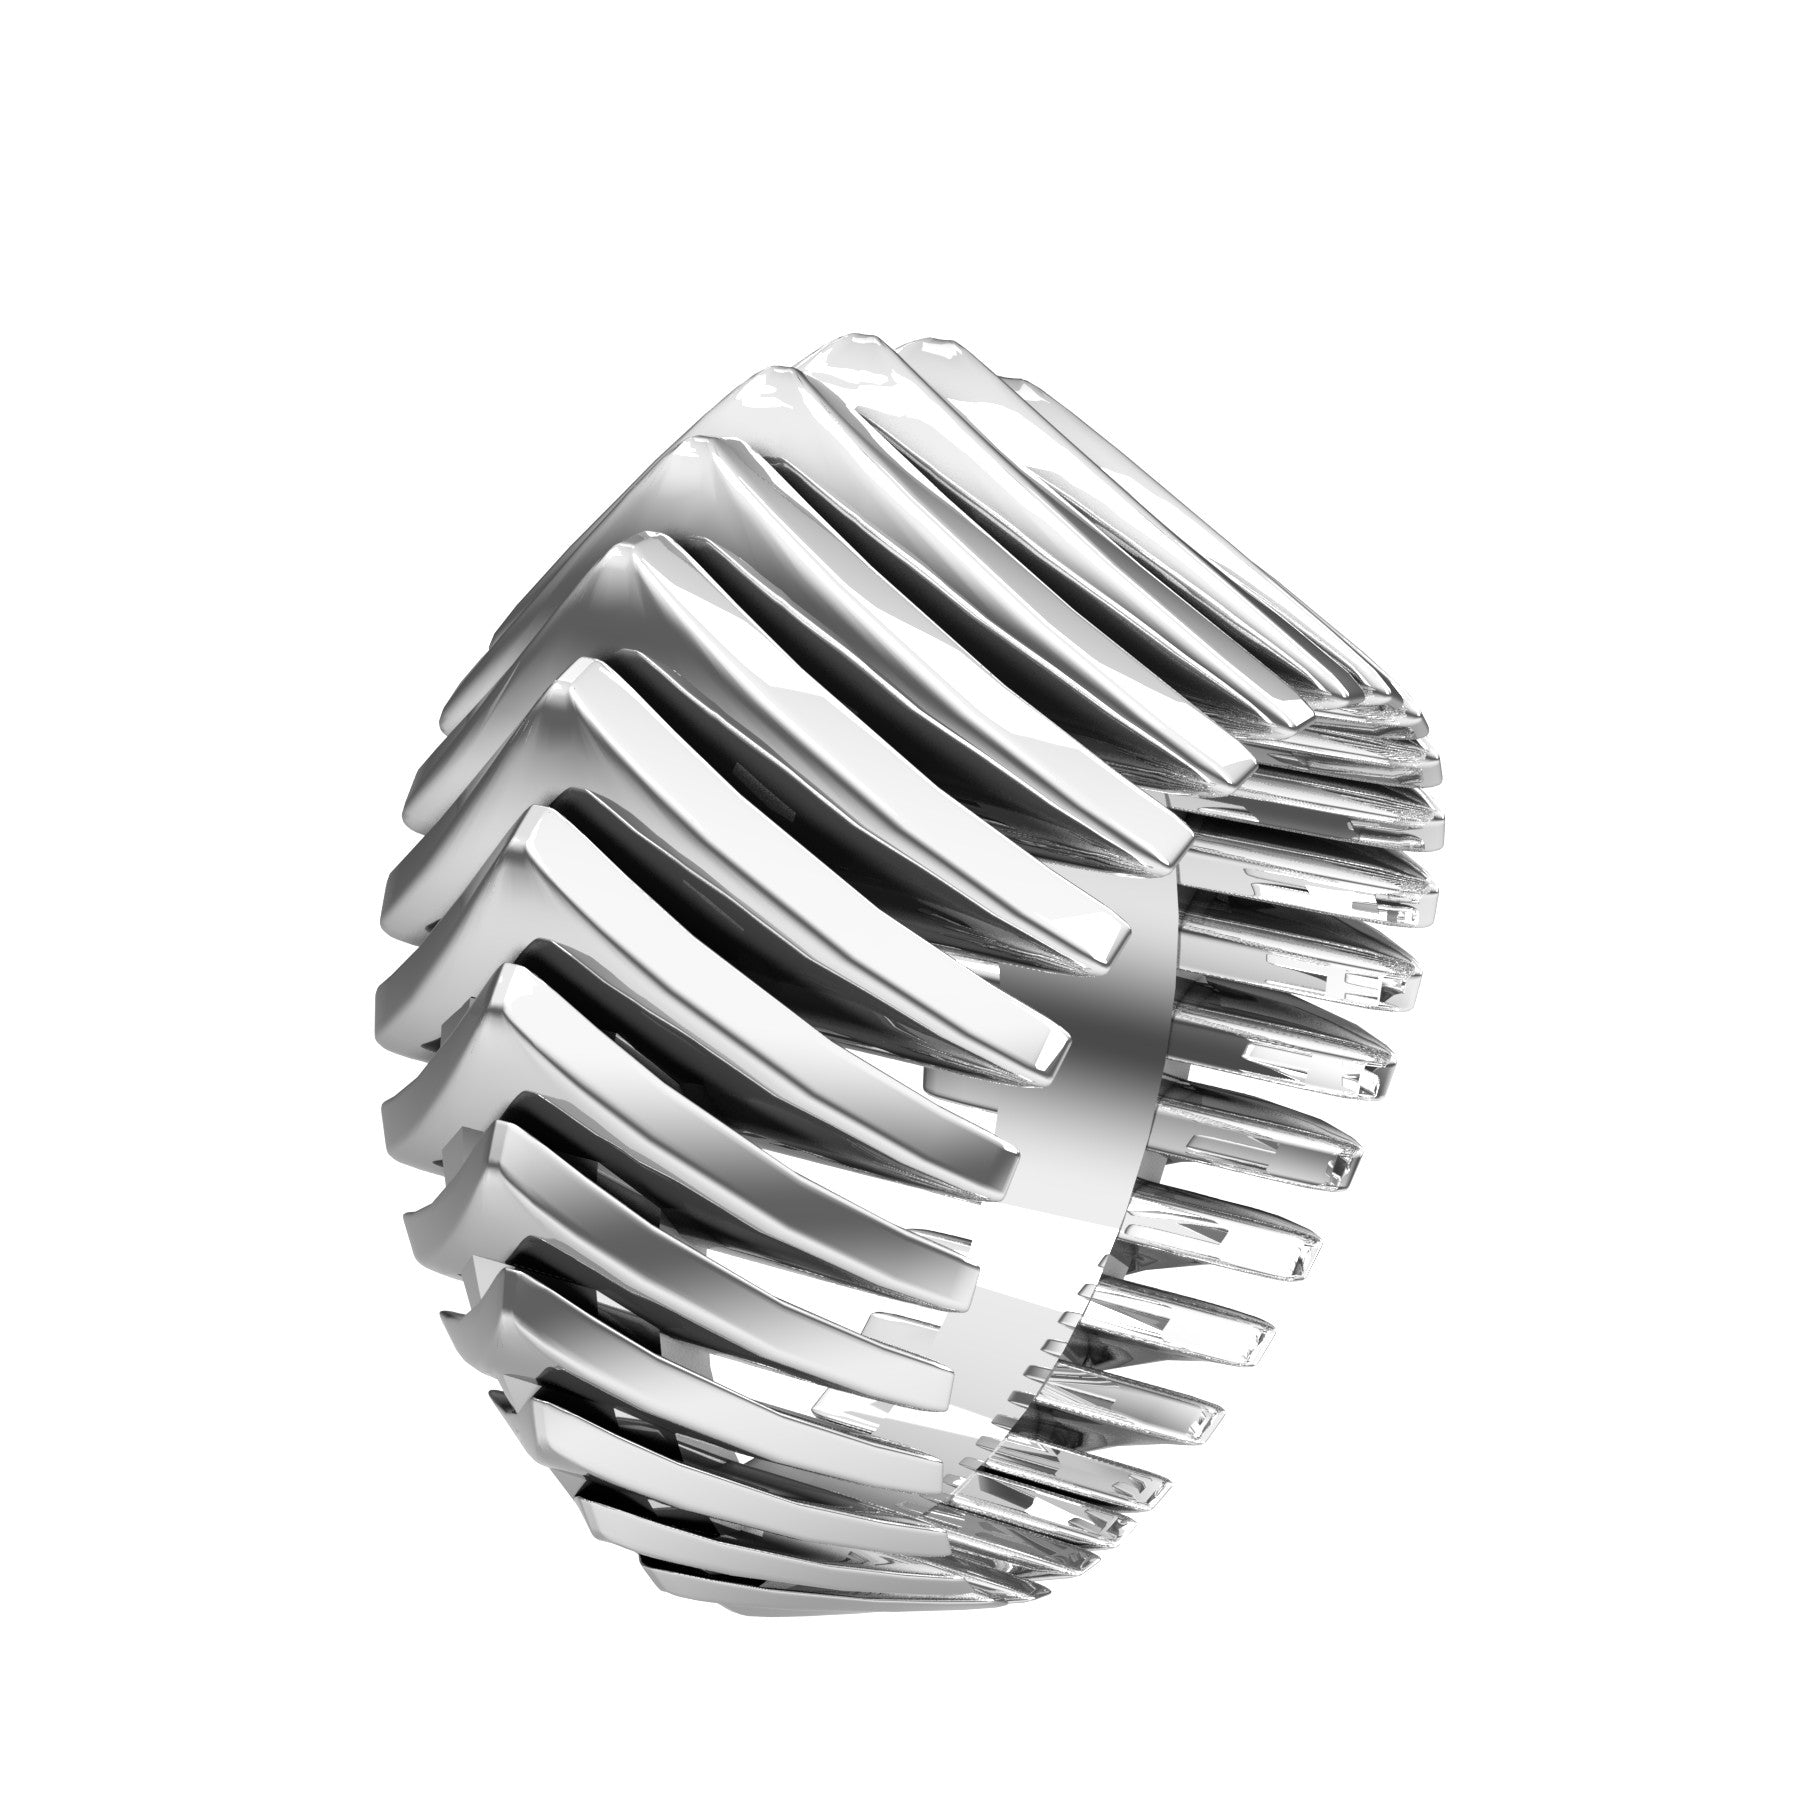 mekkano ring, sterling silver, weight about 9,8 g. (0.34 oz), width 15,6 mm max